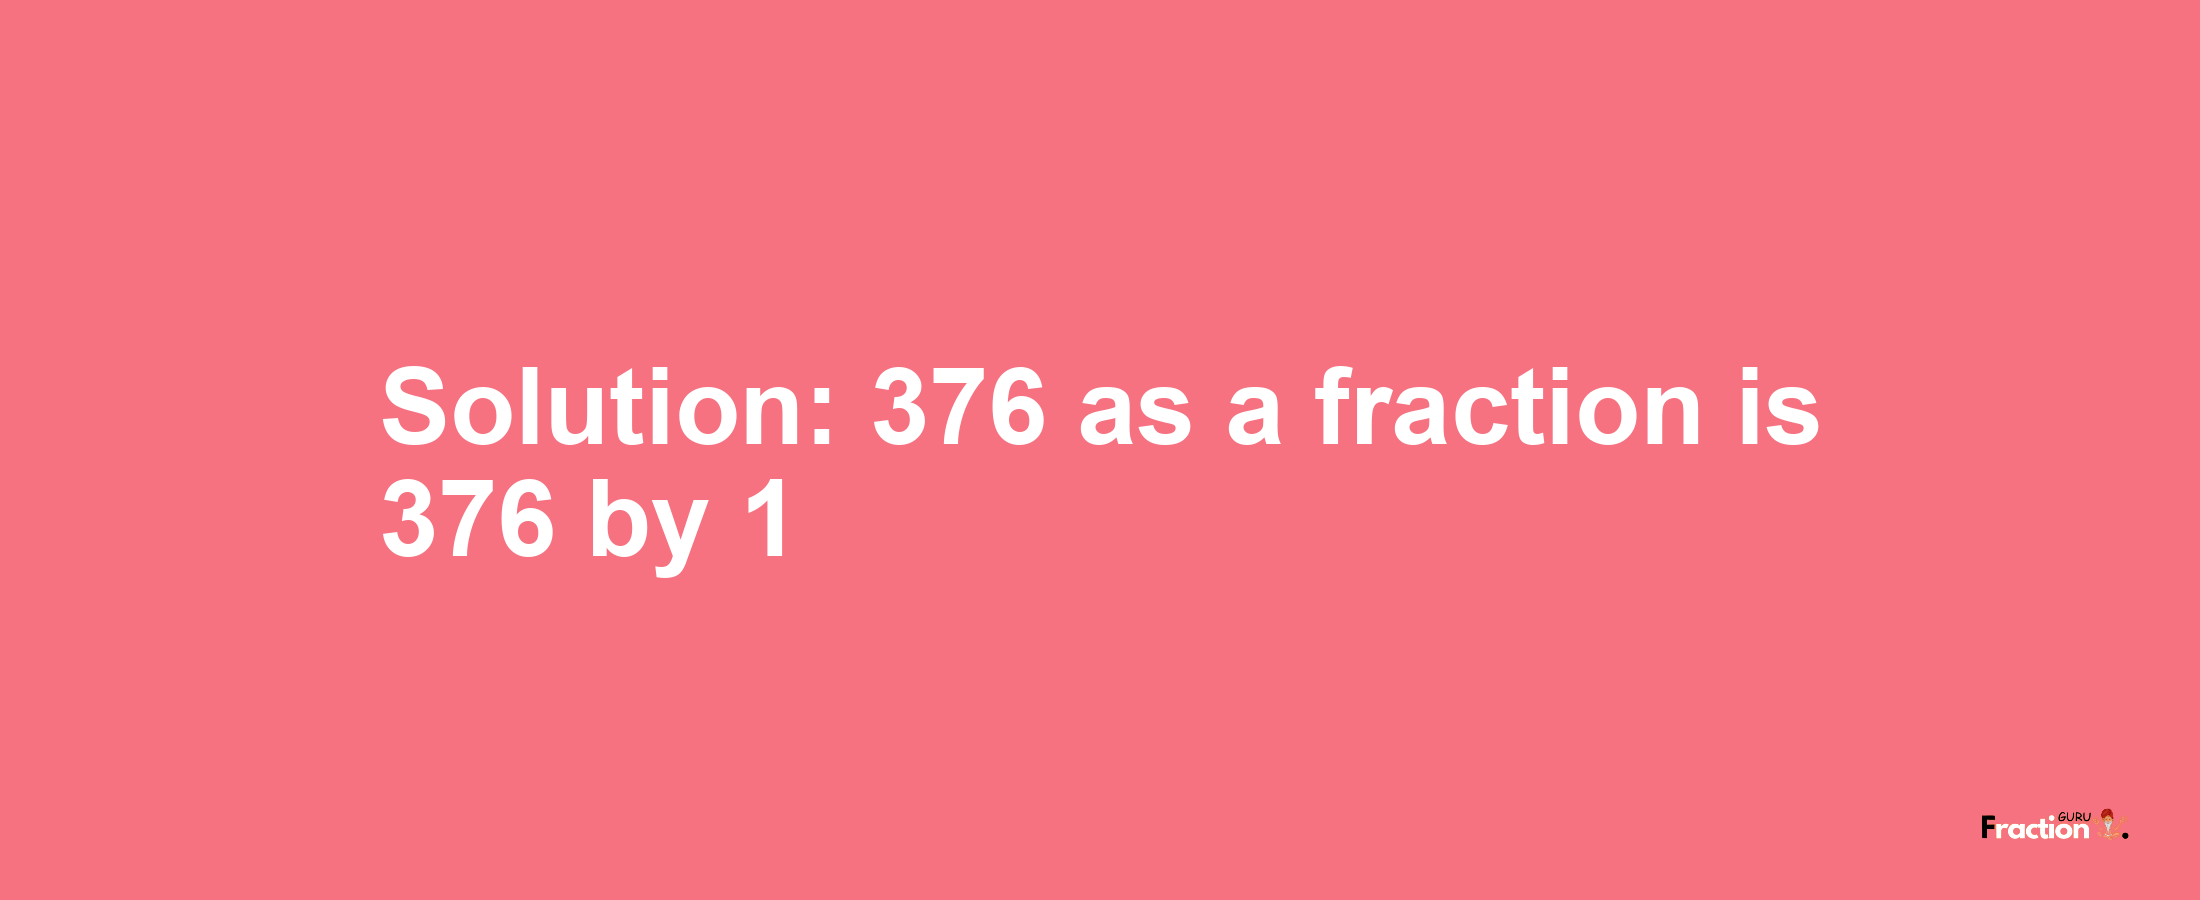 Solution:376 as a fraction is 376/1